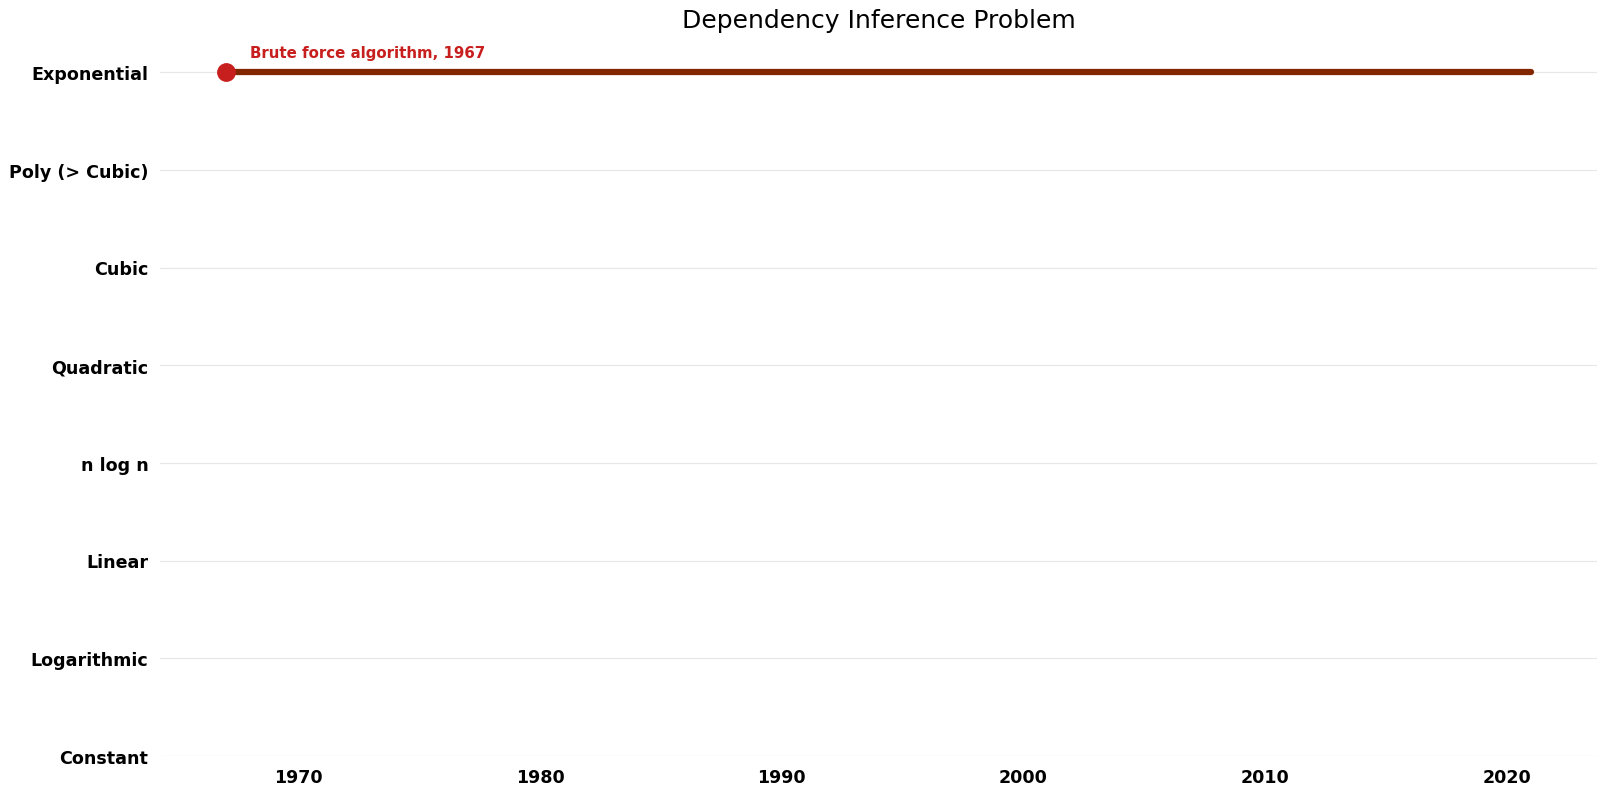 File:Dependency Inference Problem - Time.png